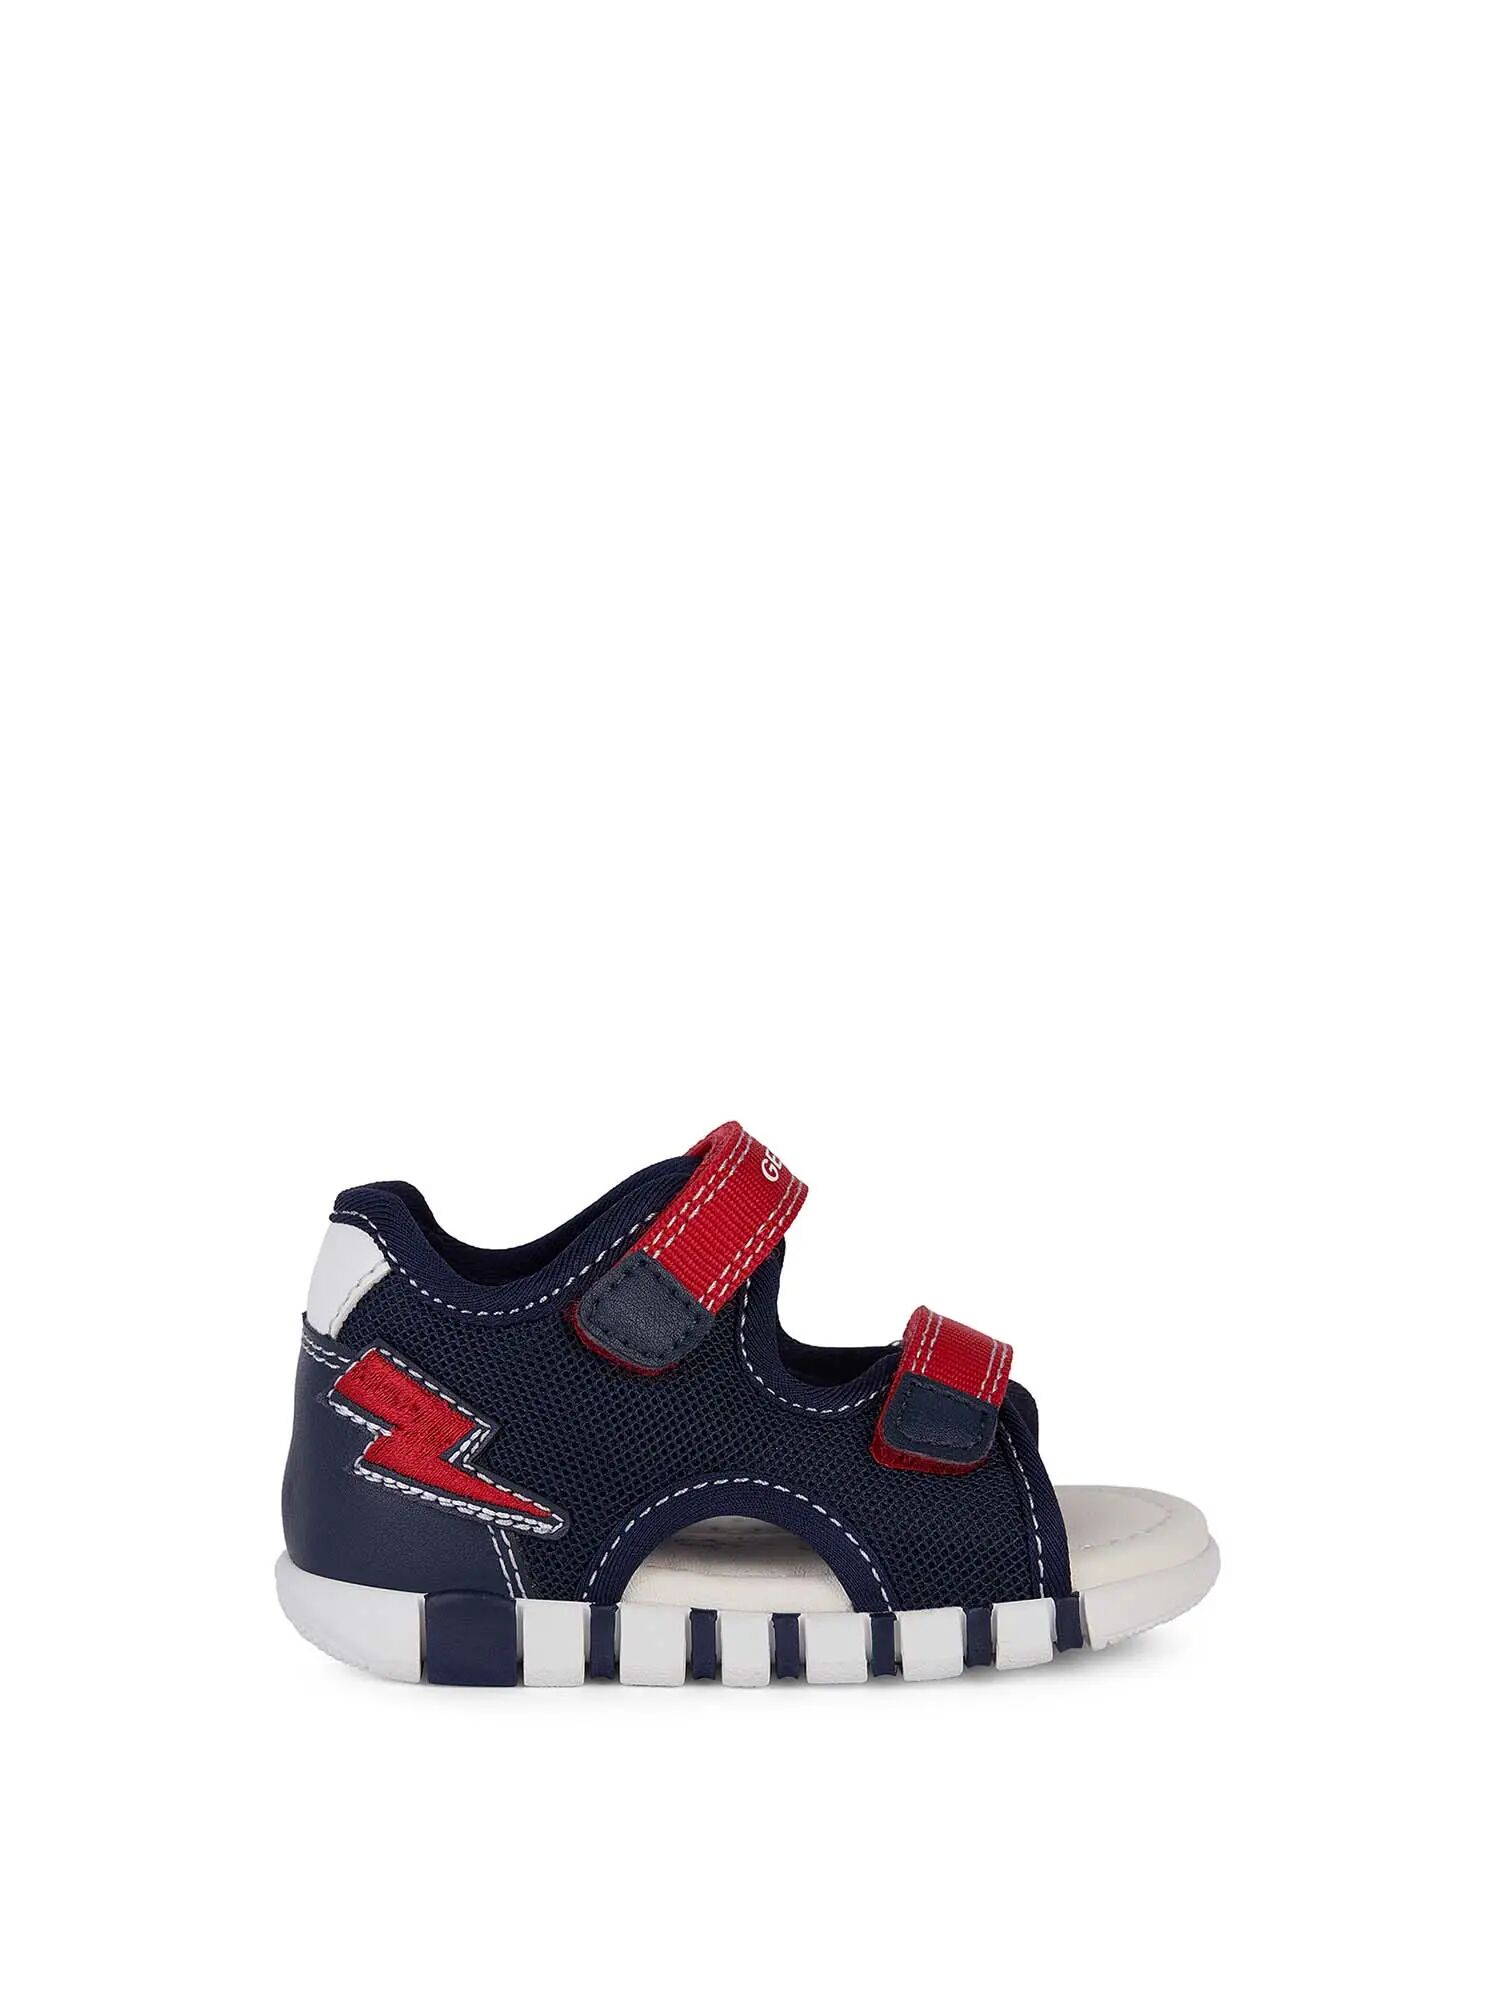 Geox Sandali Bambino Colore Navy/rosso NAVY/ROSSO 19